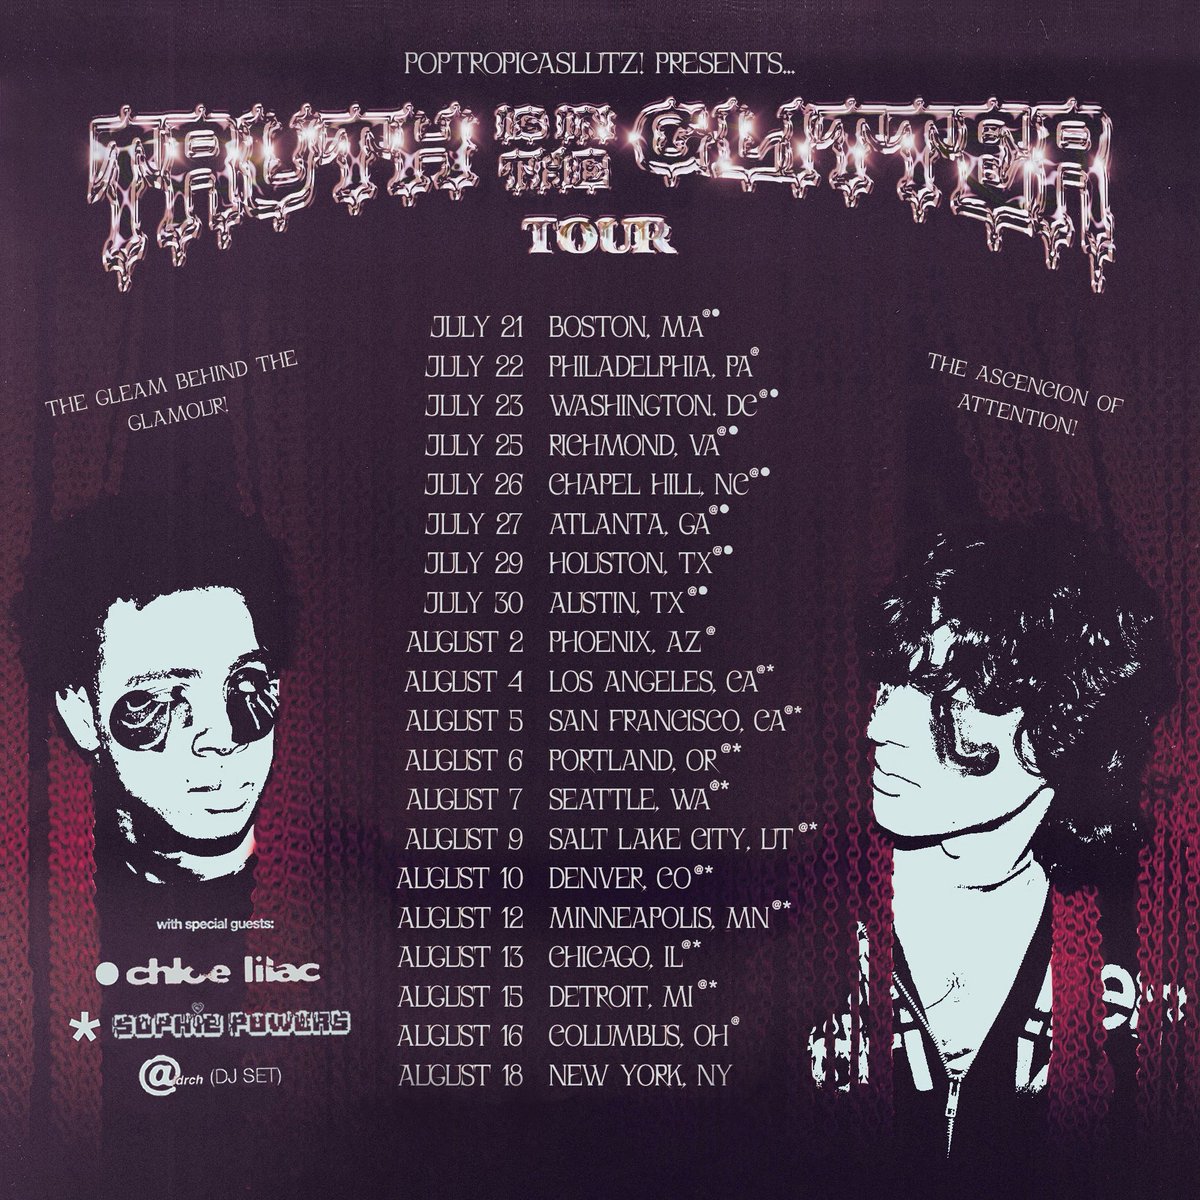 THE TRUTH IS IN THE GLITTER TOUR! GA+VIP to our first full US headliner go on sale friday at 10am EST. Attractions include - @chloelilac_ ! @sophiep0wers ! @hialdrch ! come see our makeup artist to get your glitter, stick a rumor on the gossip wall, and see the flying pigs!